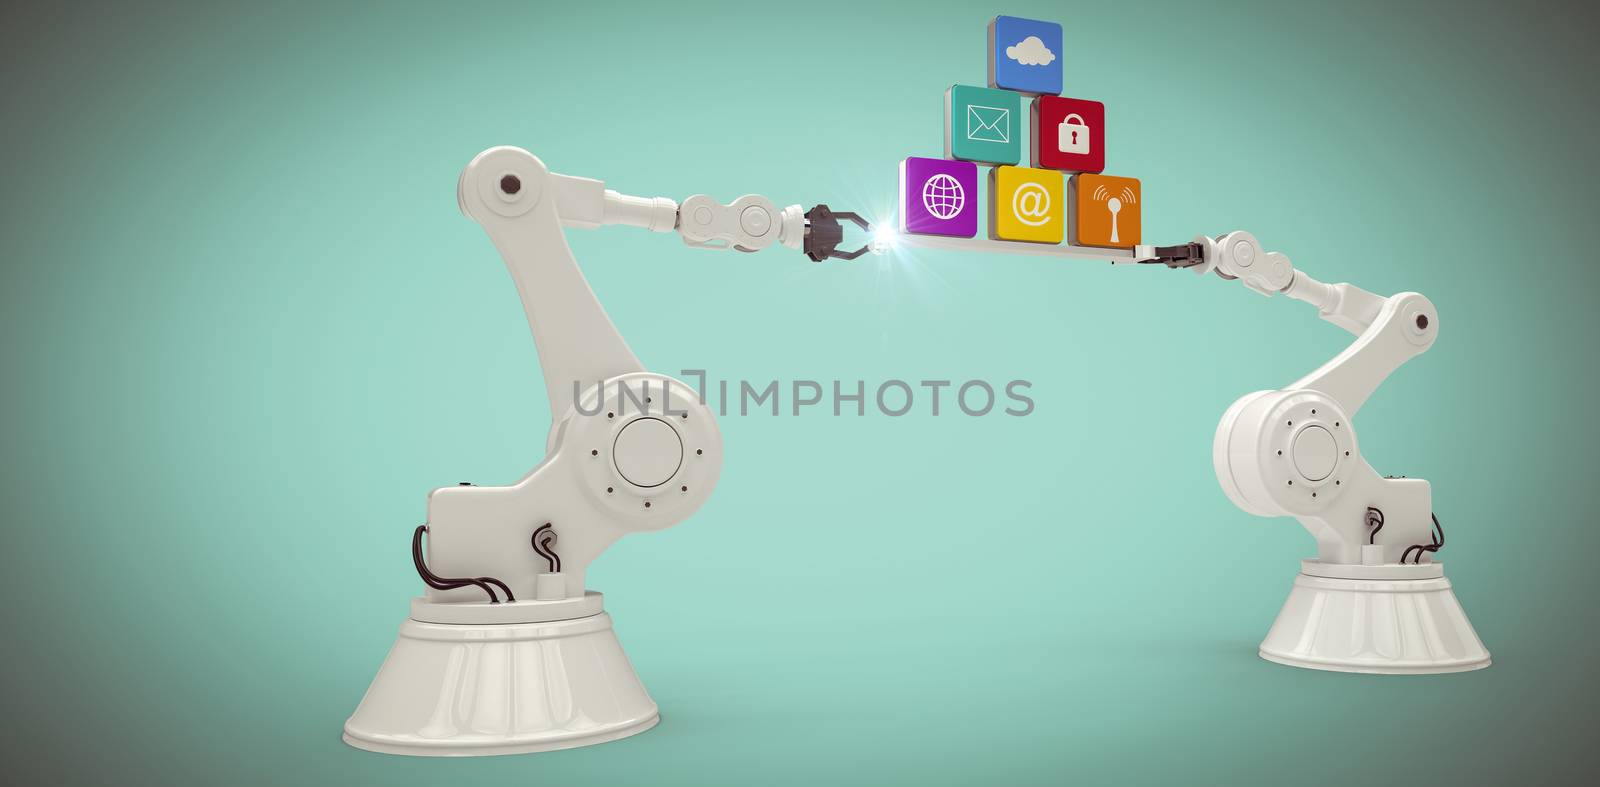 Composite image of digitally generated image of metallic robotic hands holding computer icons by Wavebreakmedia